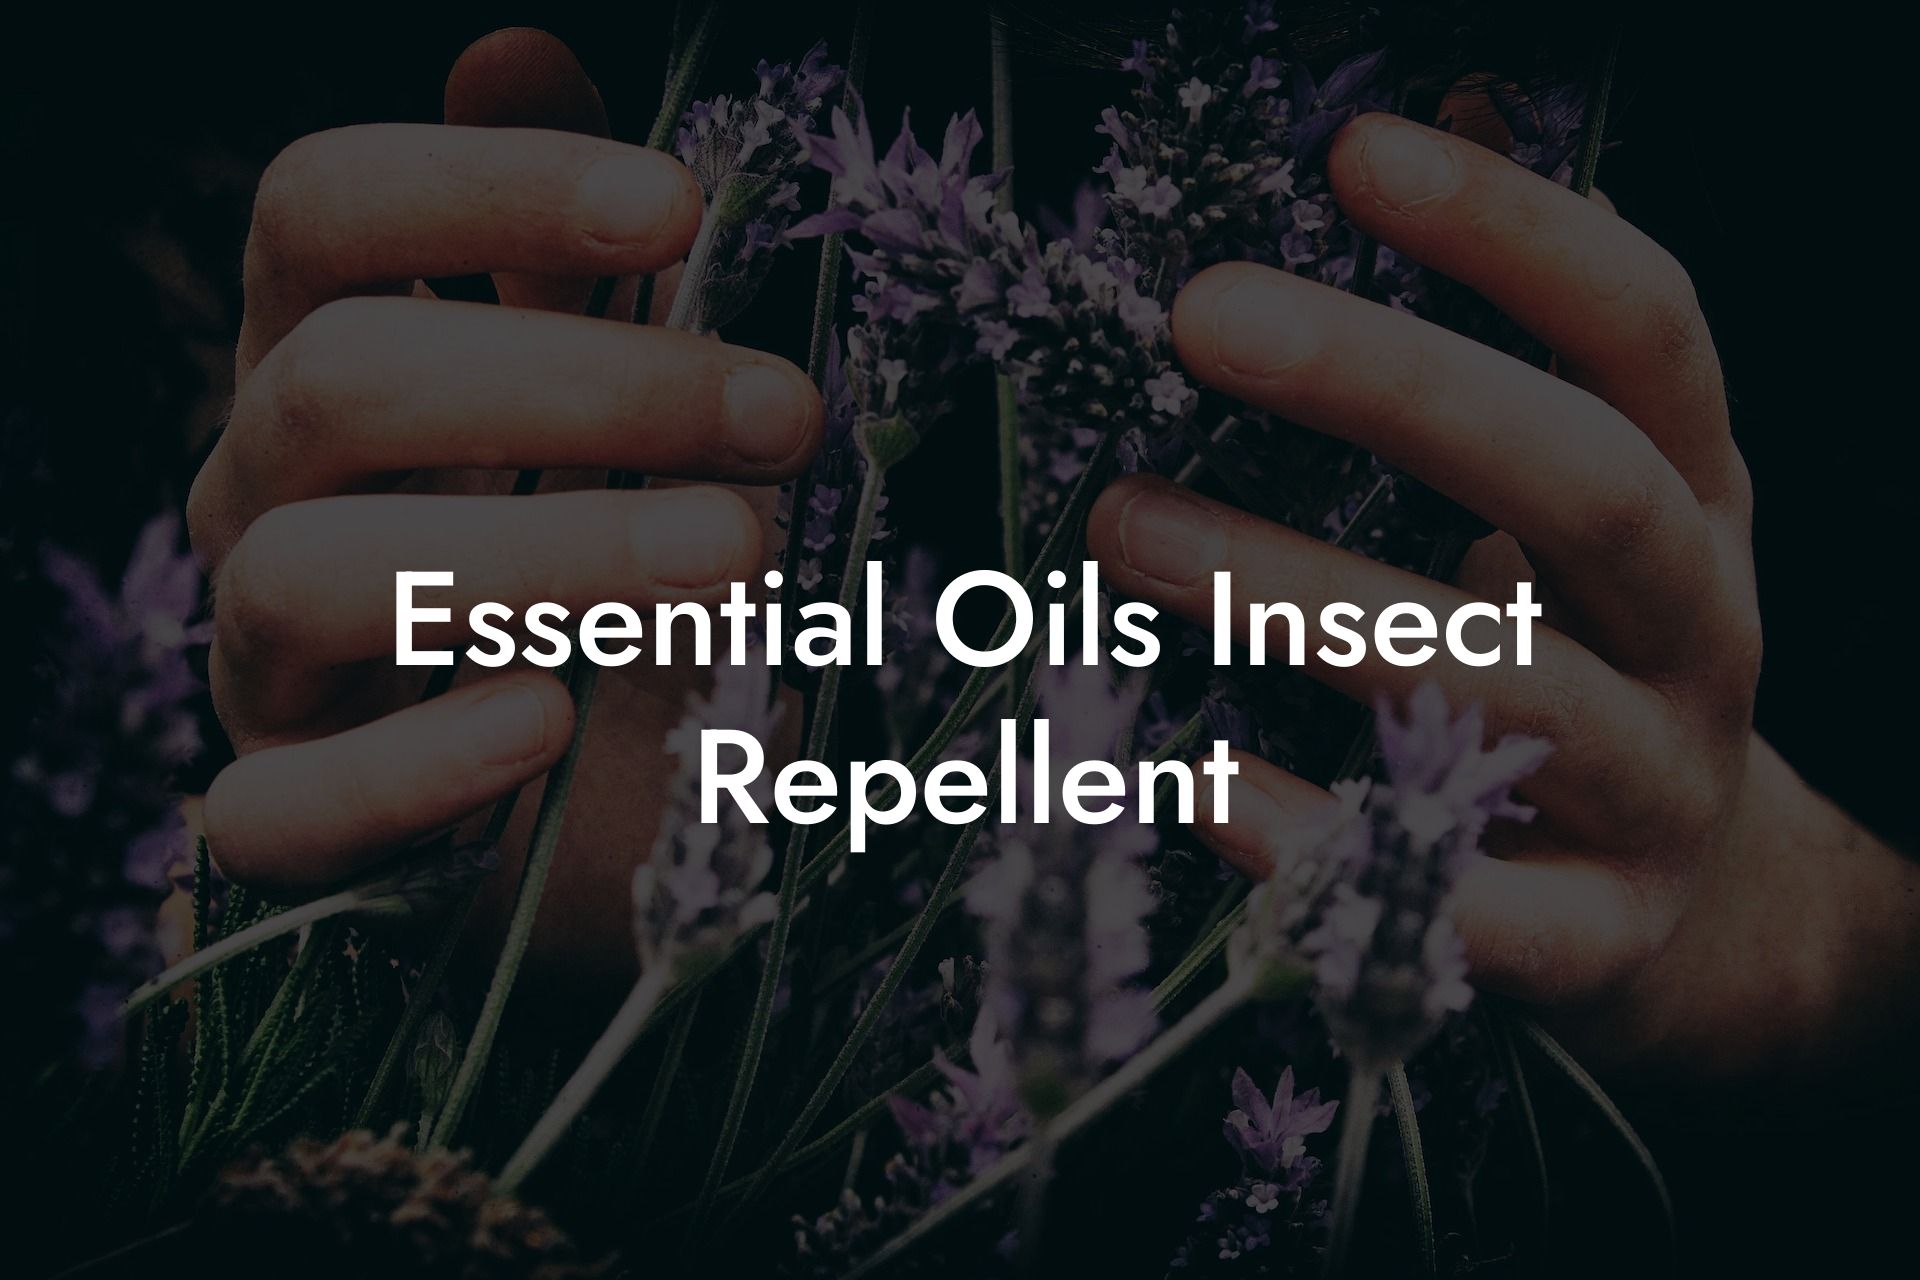 Essential Oils Insect Repellent